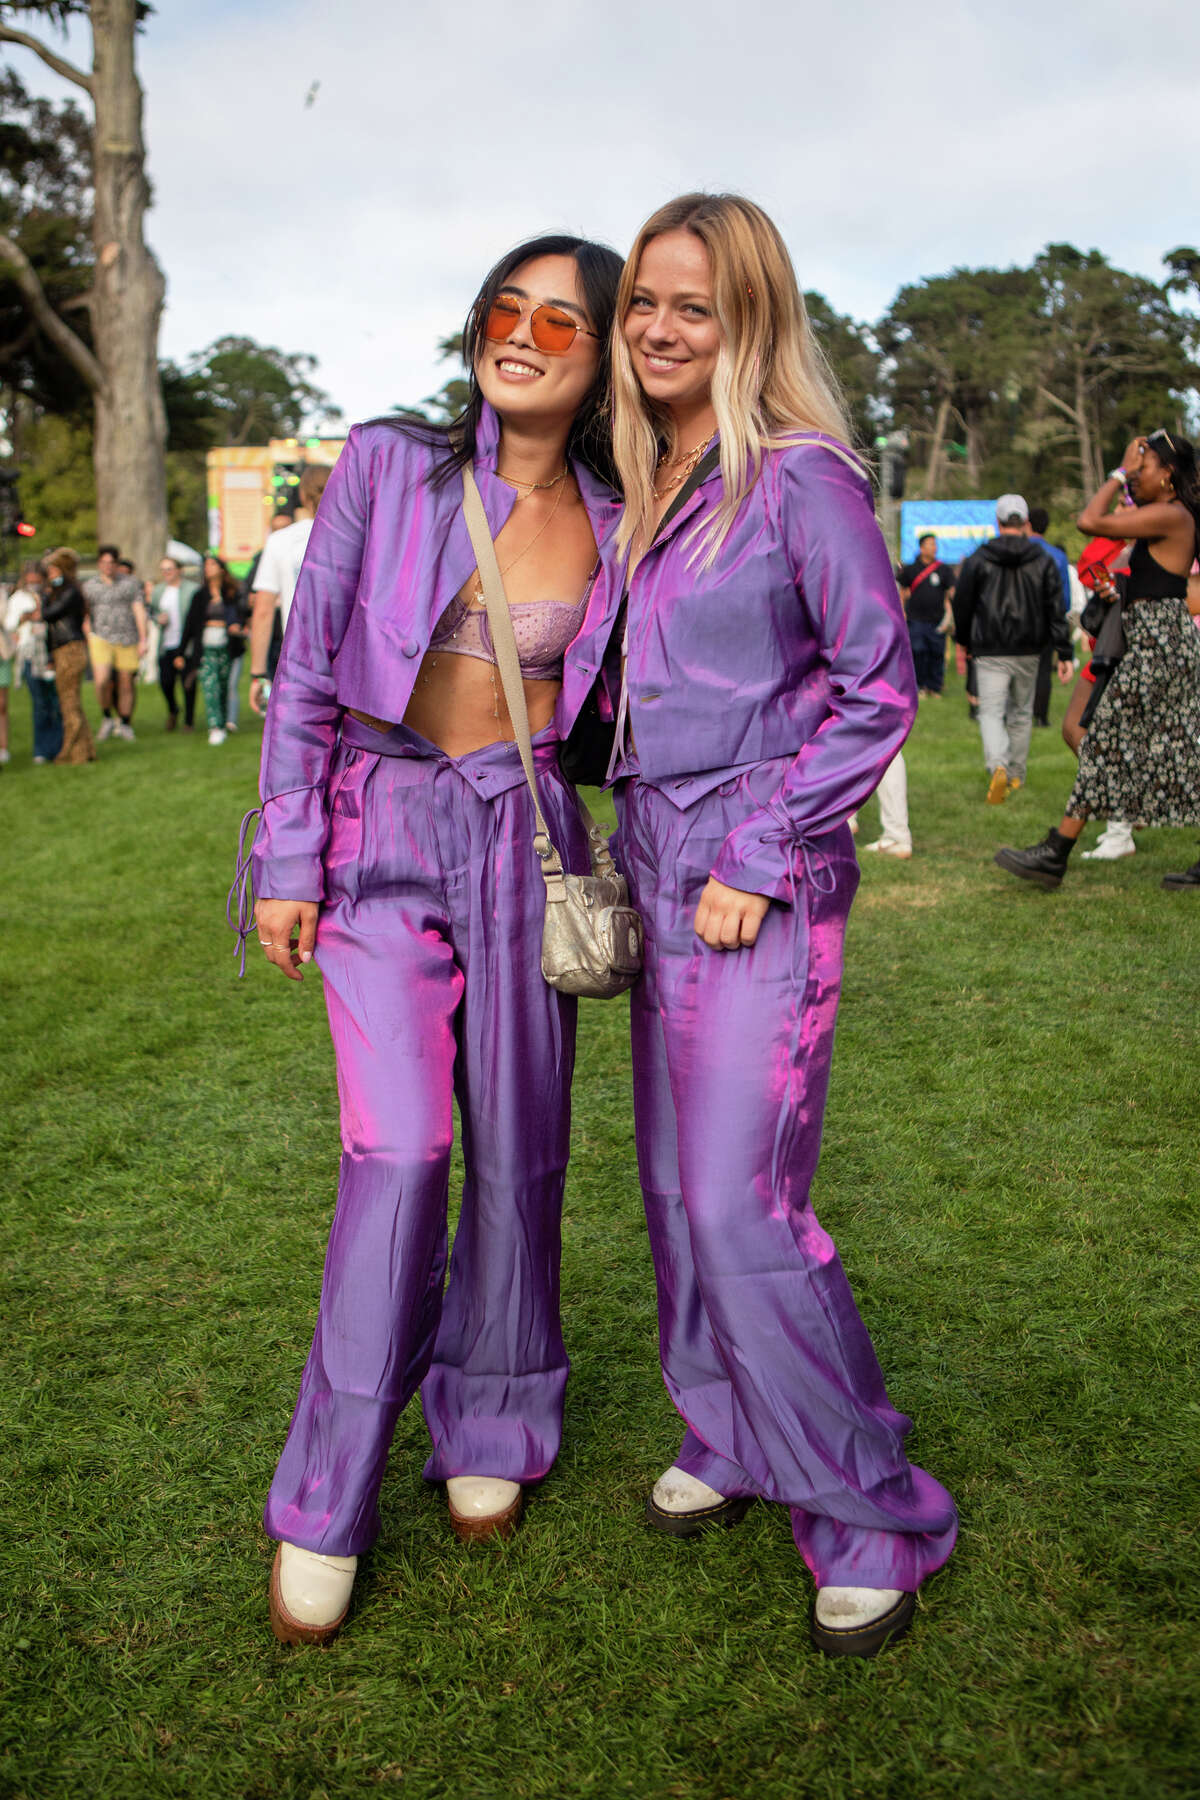 (L to R) Vivian Feng and Natalie Williams at We're More Costumes at Golden Gate Park Outdoor Lands on August 5, 2022 in San Francisco, California.